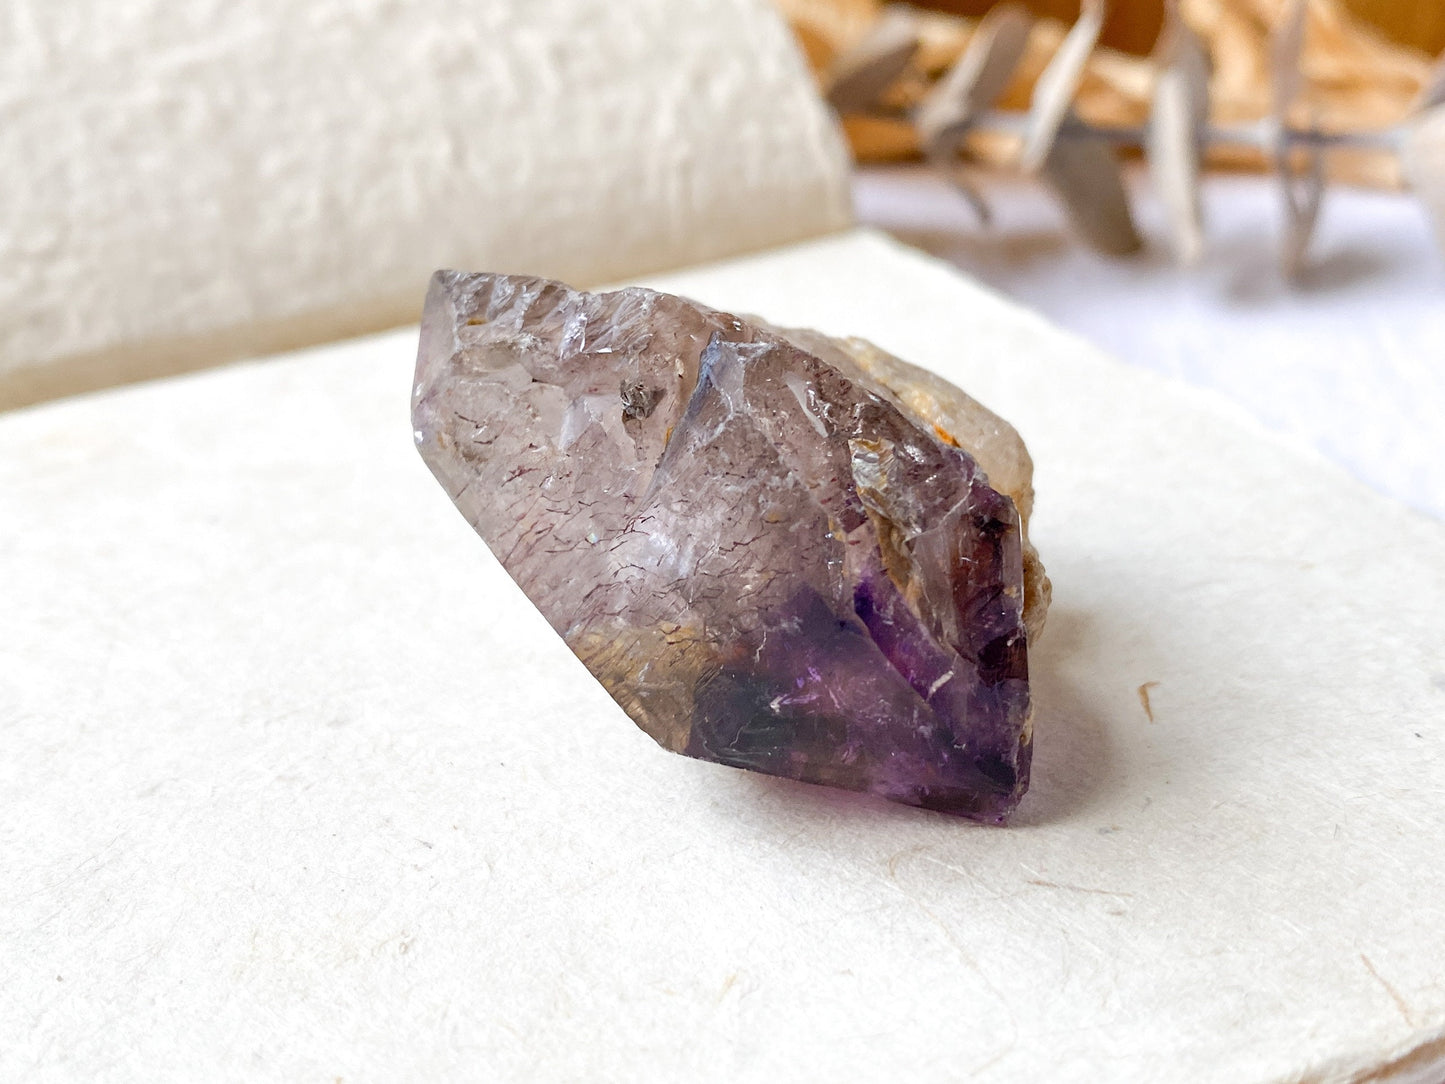 Elestial Shangaan Amethyst Crystal ~ Smoky Quartz and Amethyst with Harlequin Red Hematite inclusions- Rock Shop